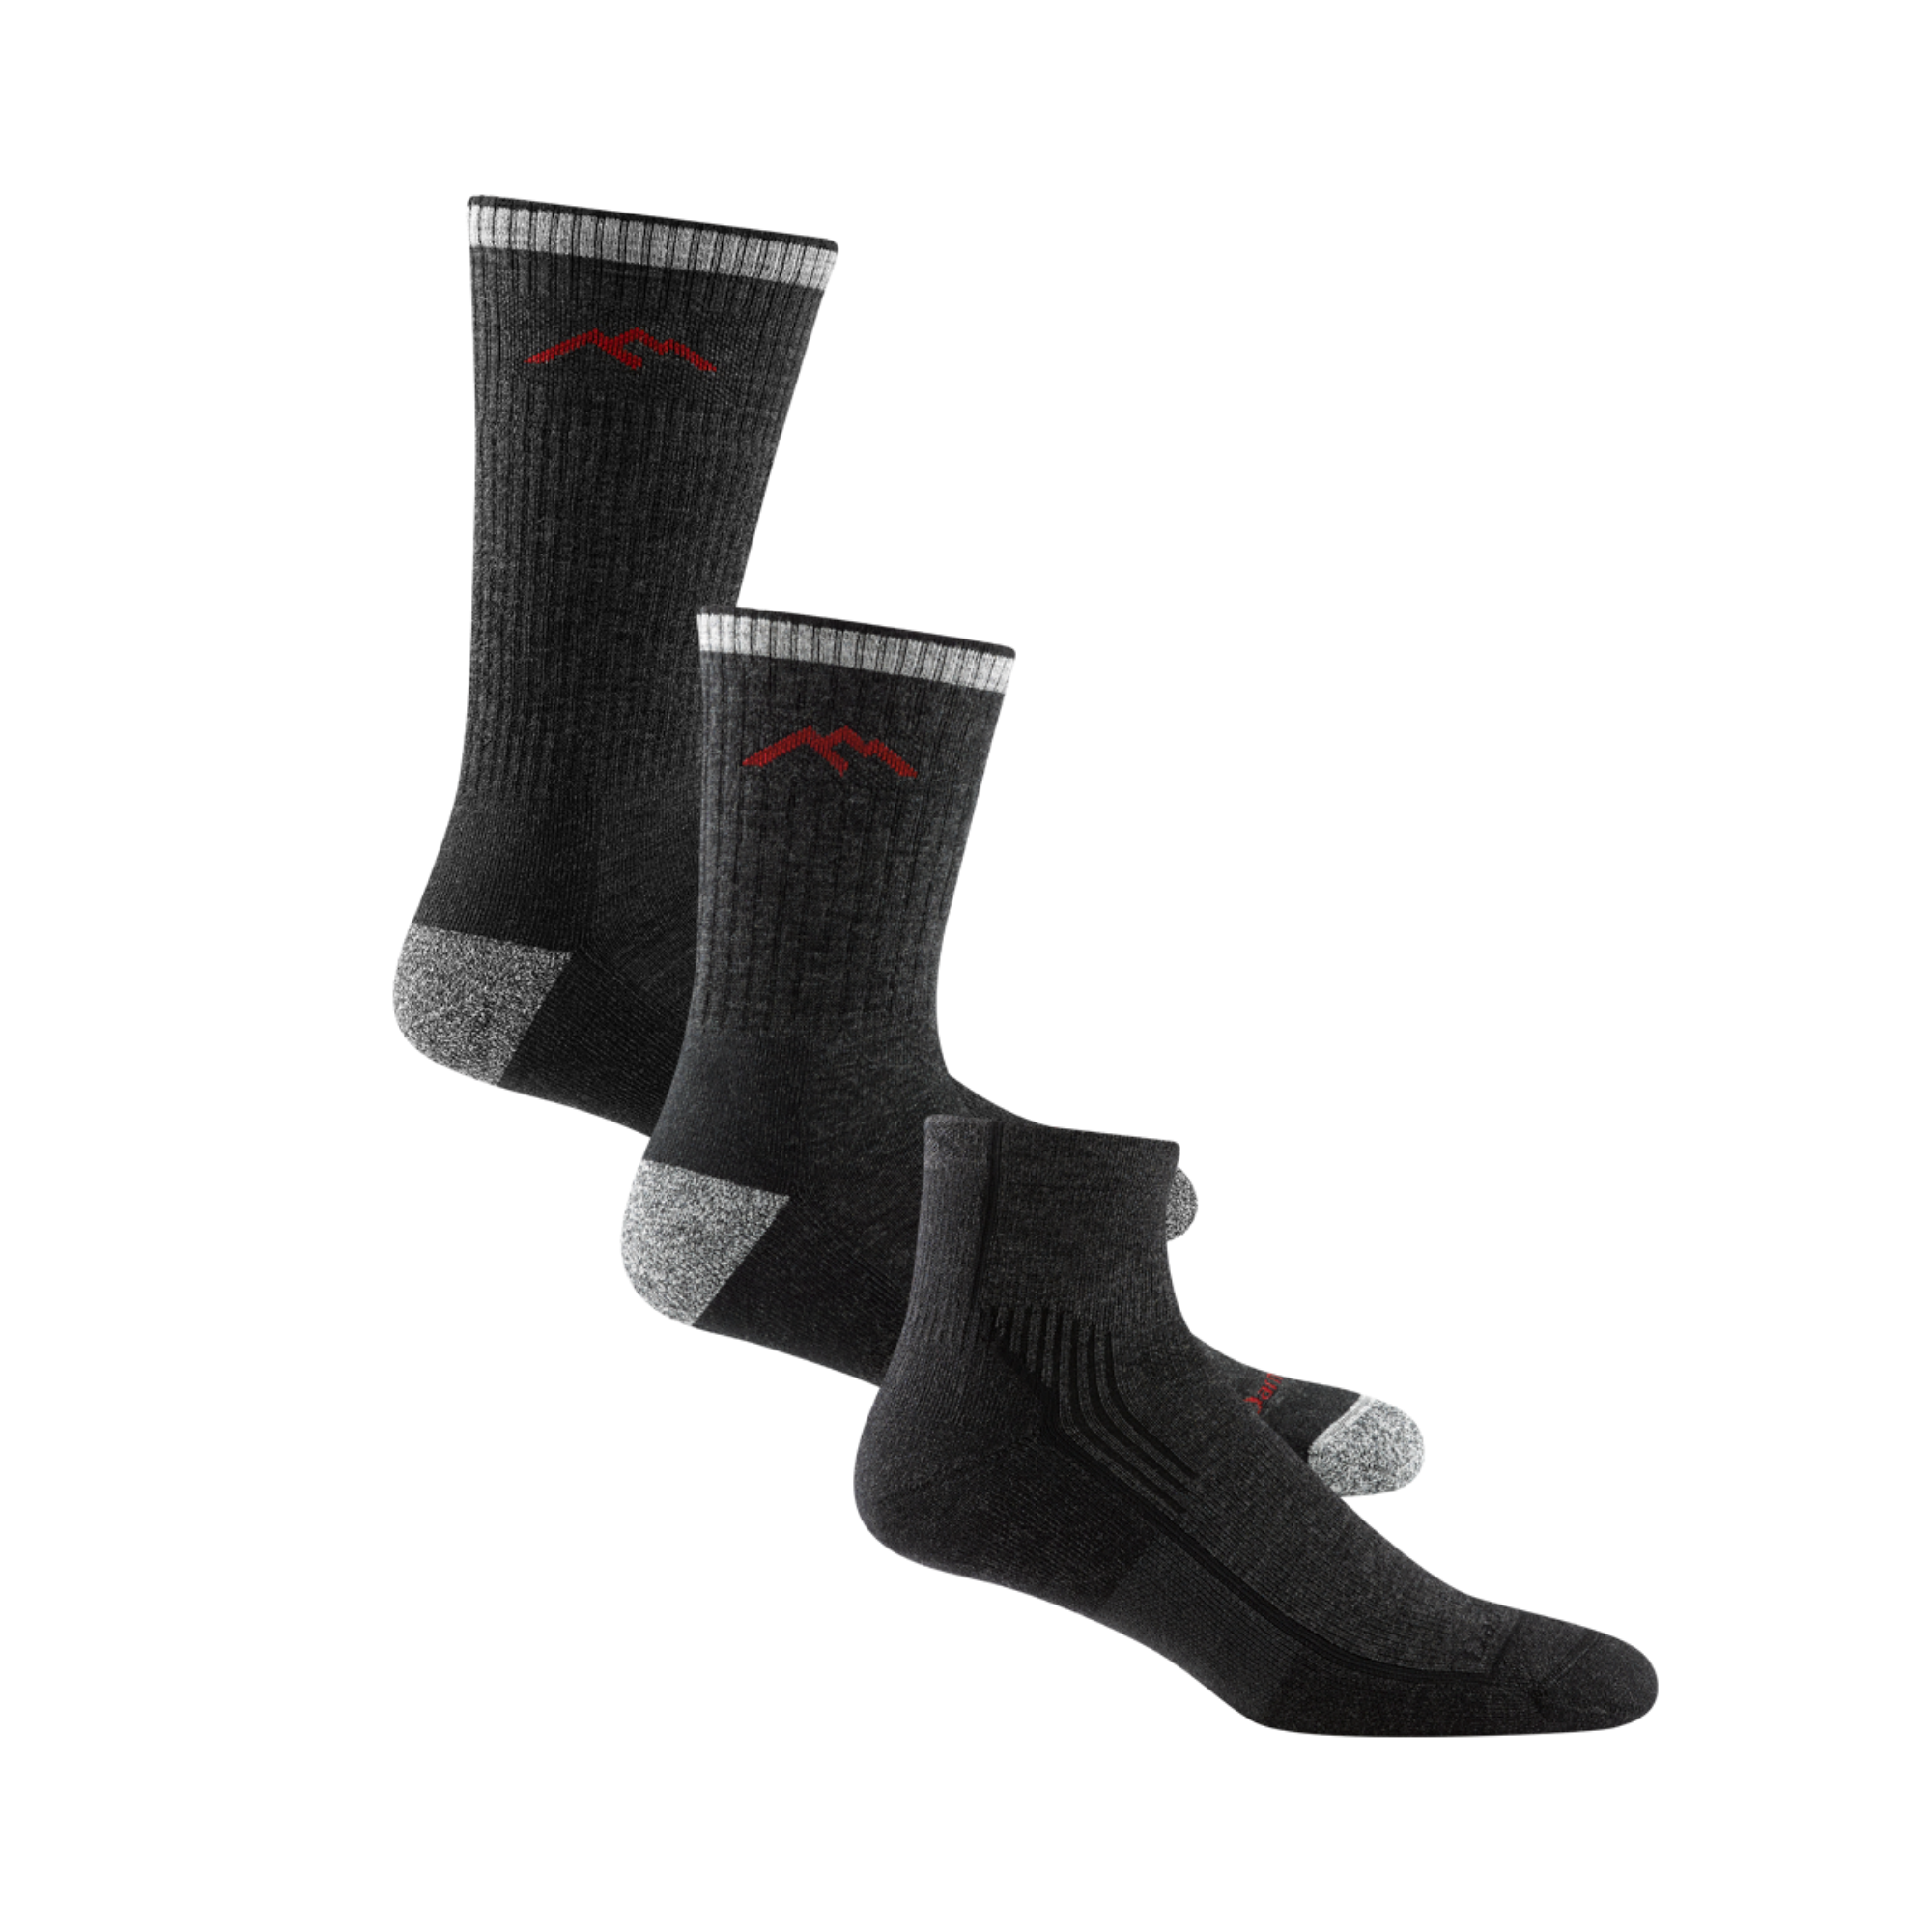 3 pack bundle shot of the men's boot, micro crew, and quarter height hiking socks all in the color black